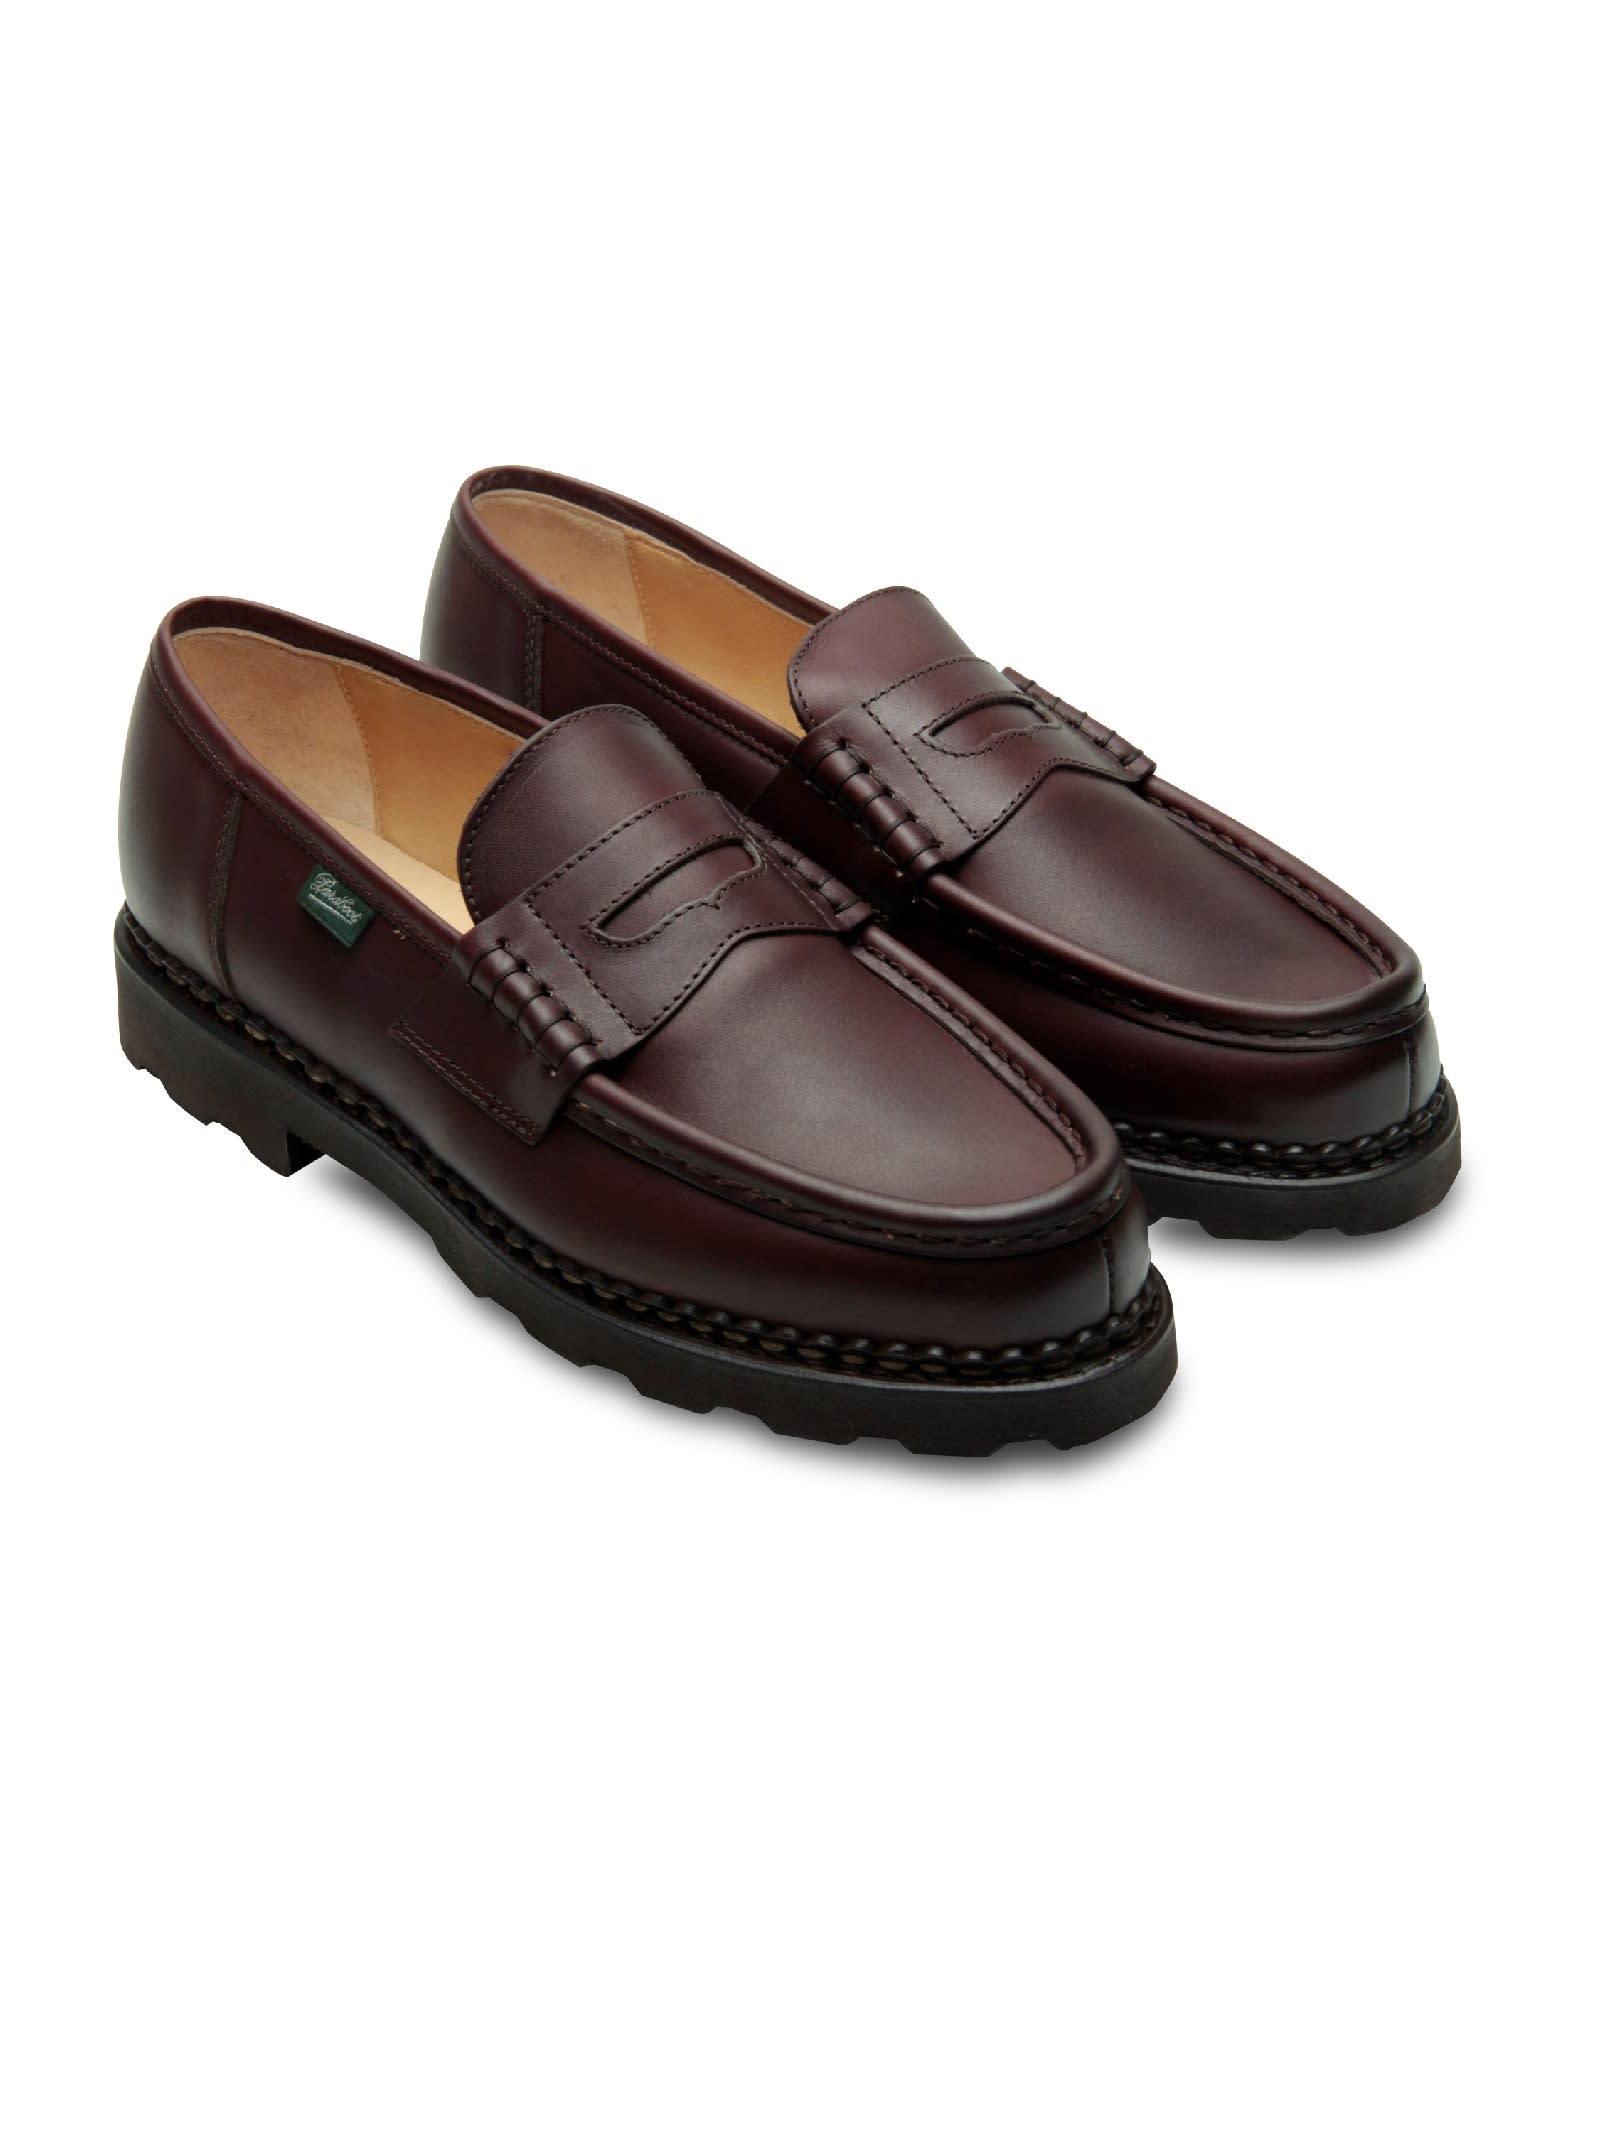 Shop Paraboot Leather Reims Penny Loafers In Marron Lis Cafe`